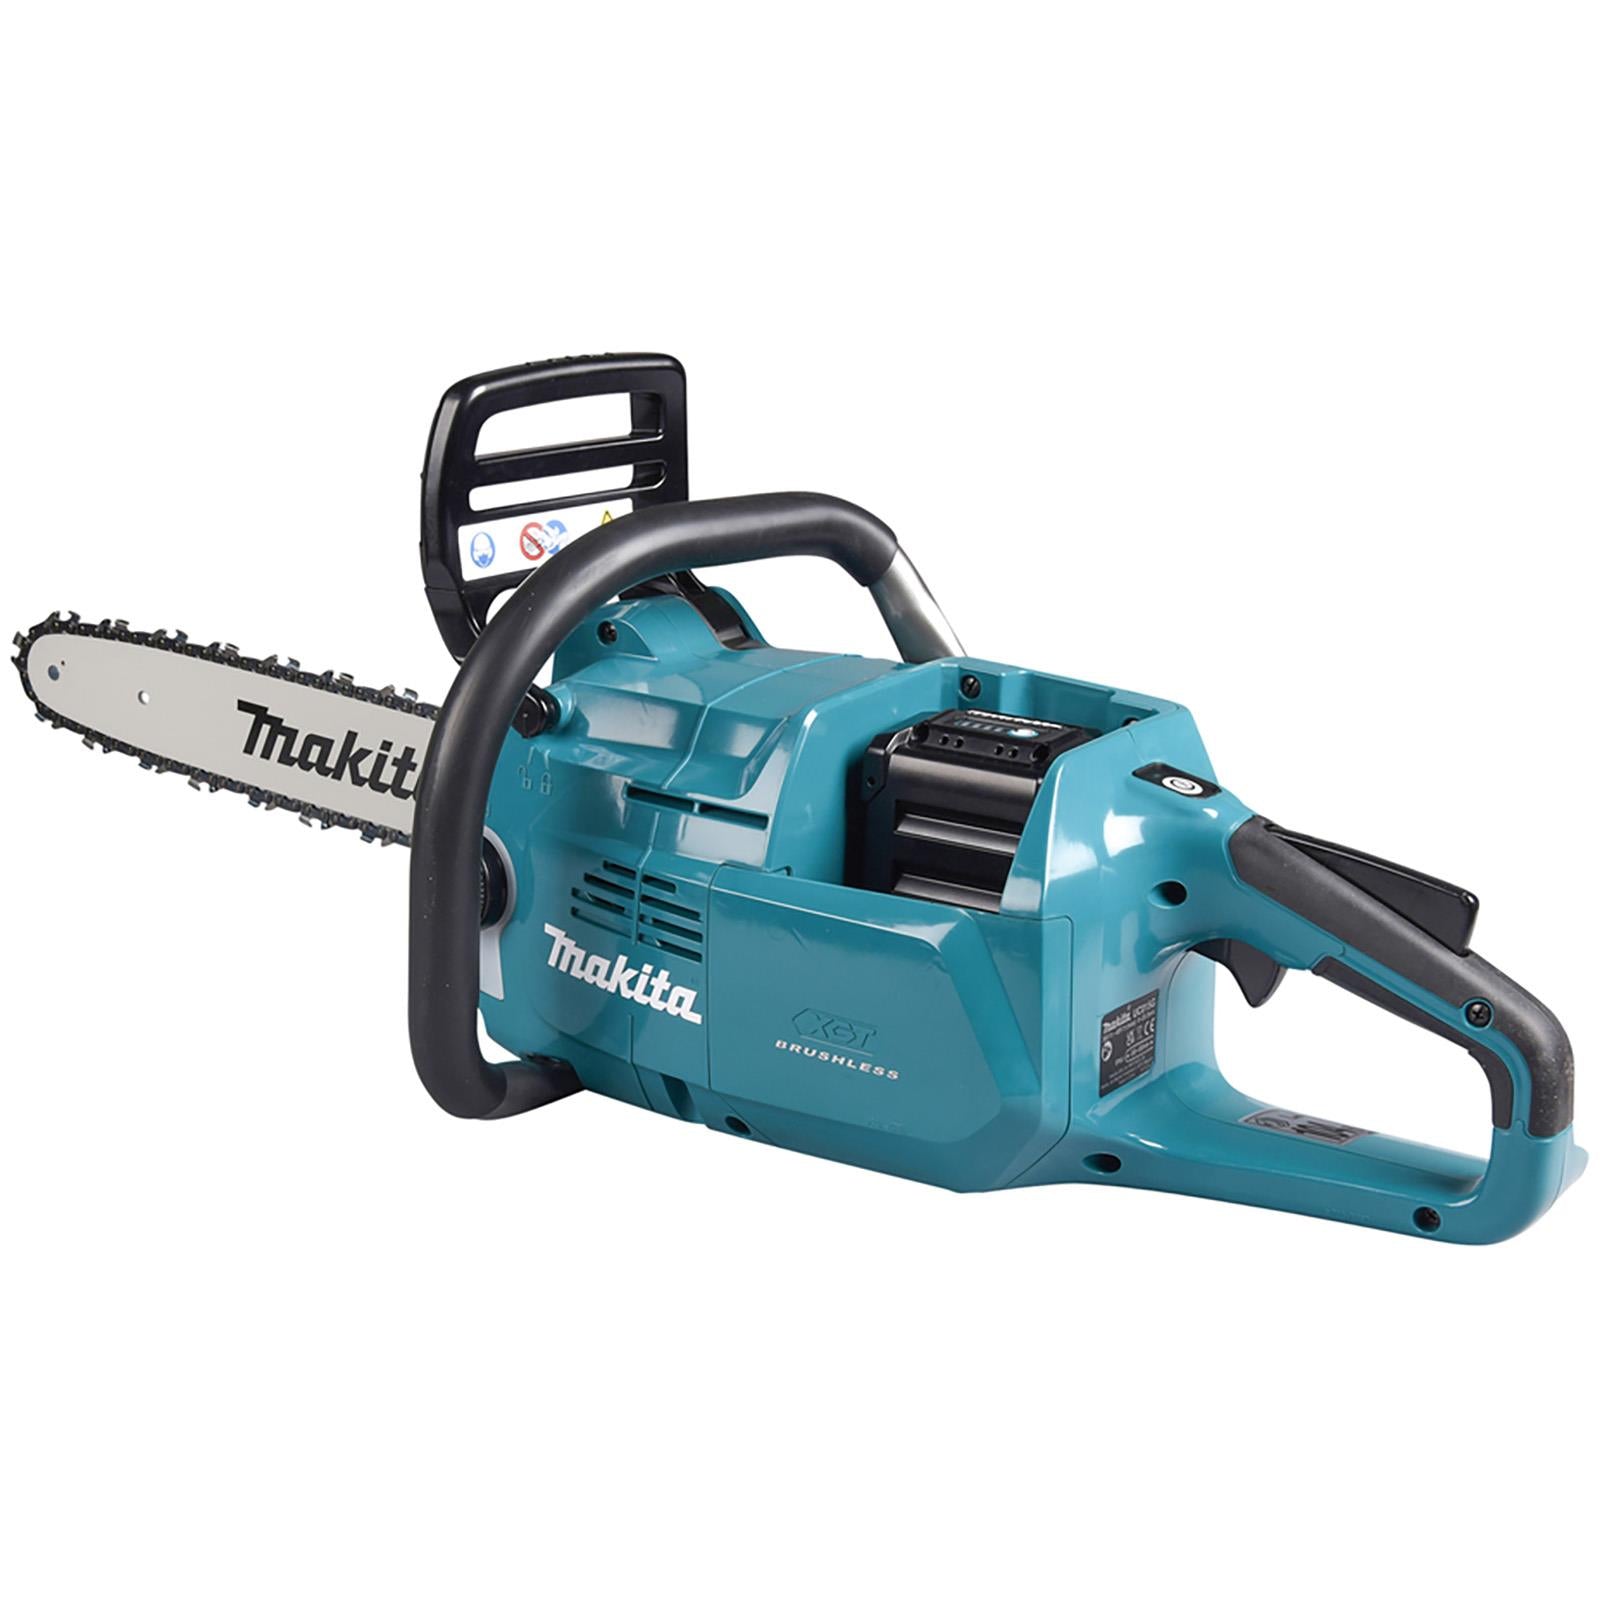 Makita Chainsaw Kit Heavy Duty 35cm 14" 40V XGT Brushless Cordless 2 x 5Ah Battery and Rapid Charger Garden Tree Cutting Pruning UC015GT201